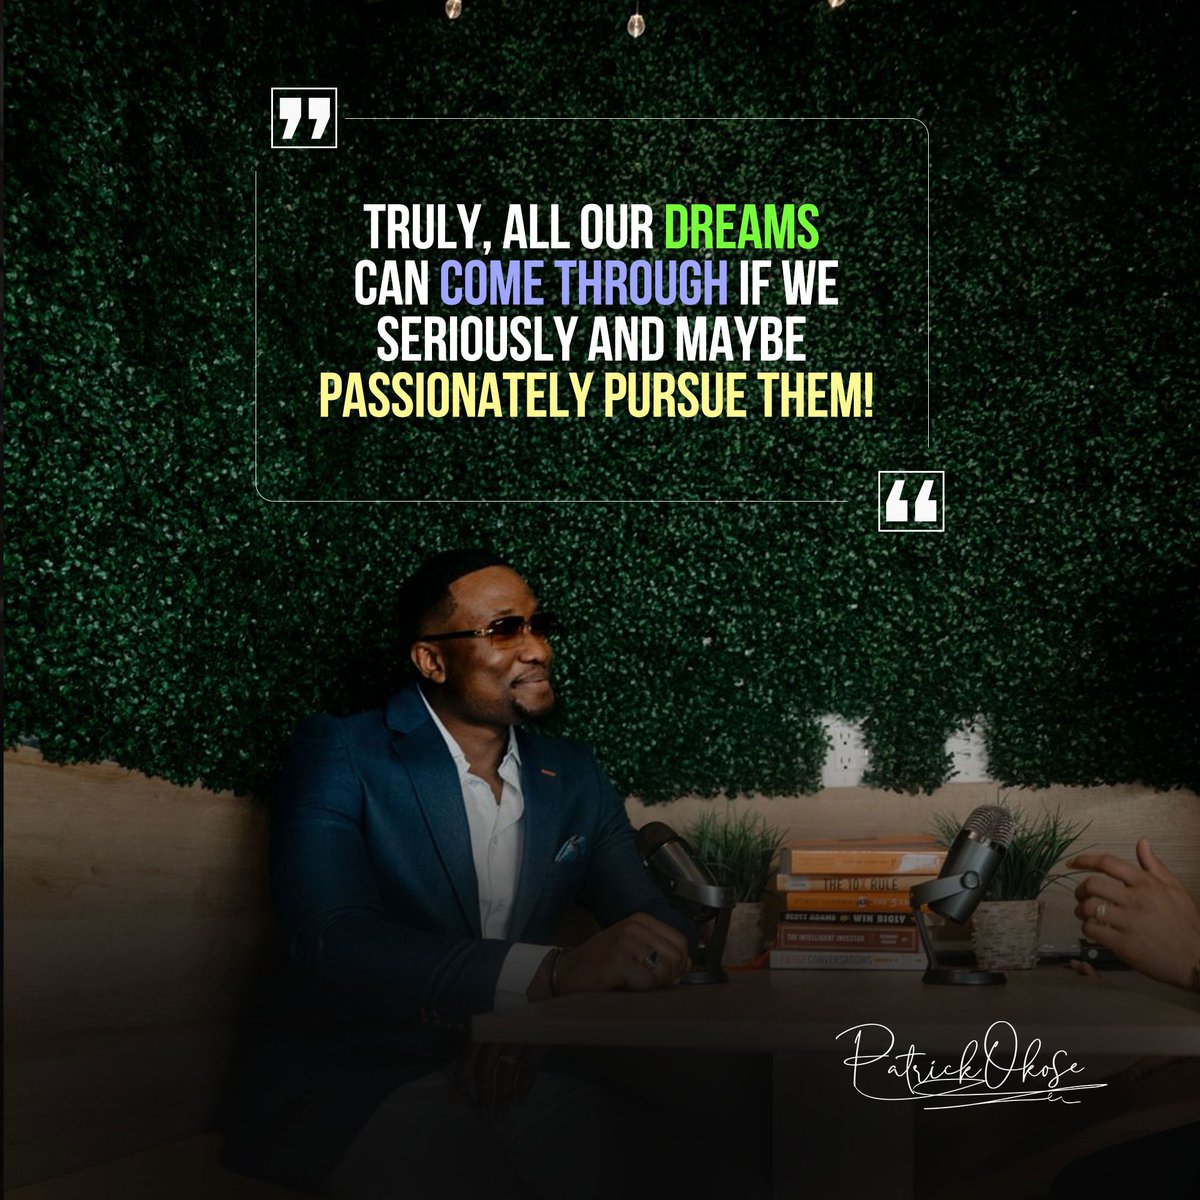 TRULY, ALL OUR DREAMS CAN COME THROUGH IF WE SERIOUSLY AND MAYBE PASSIONATELY PURSUE THEM! #therealpatrickokose #therealpatrickokoseandassociates #dream #dreams #passion #serious #seriously #passionate #pursue #chase #run